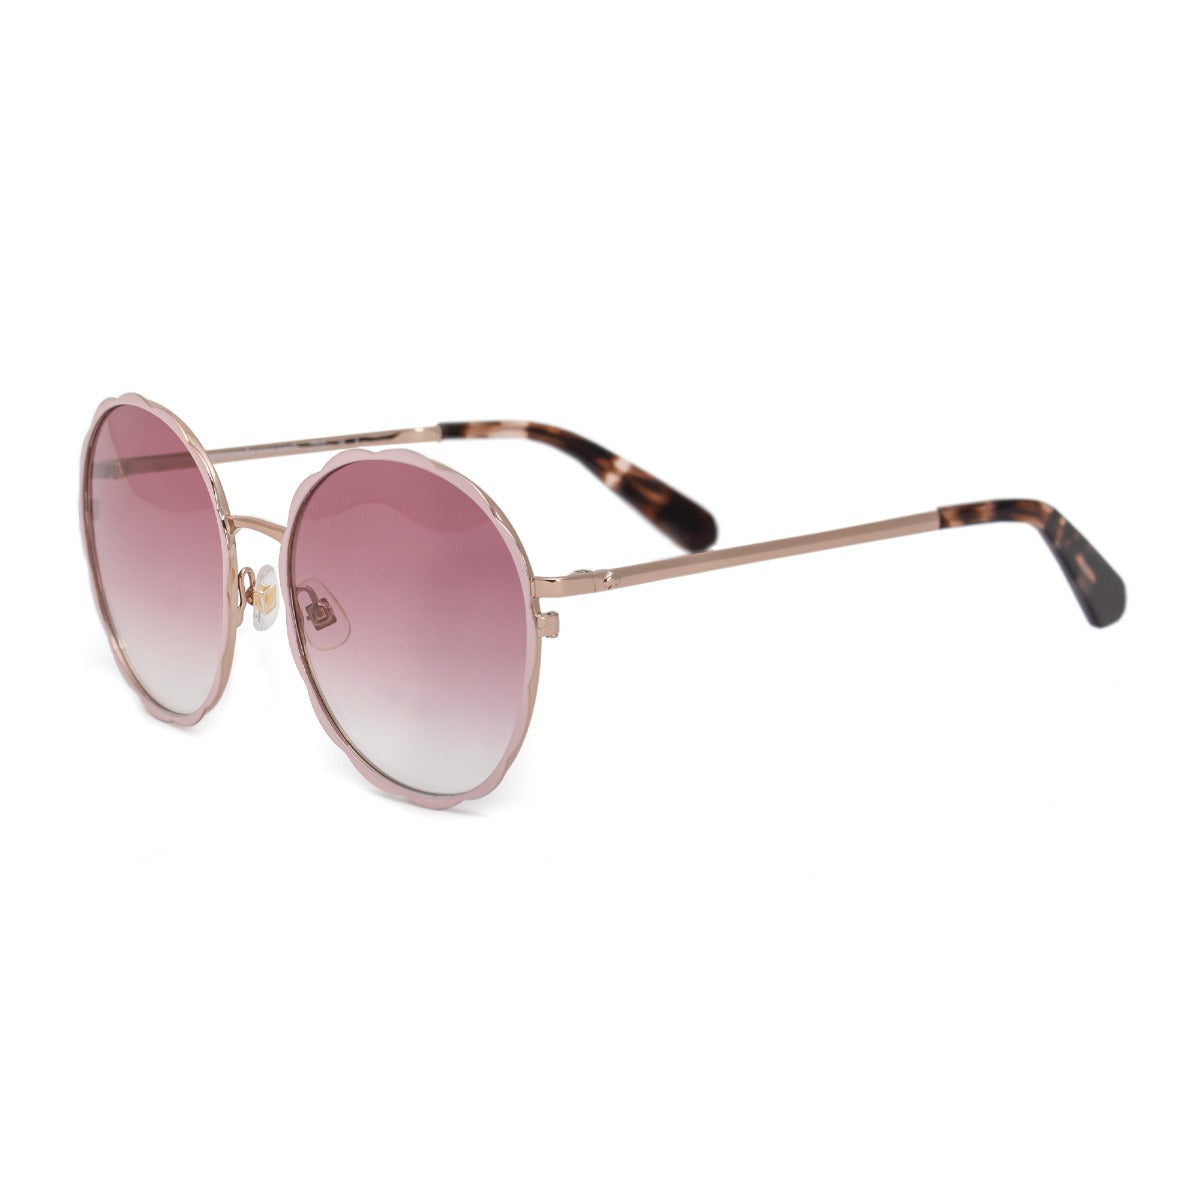 Kate Spade Round Sunglasses Cannes G S 35J 57